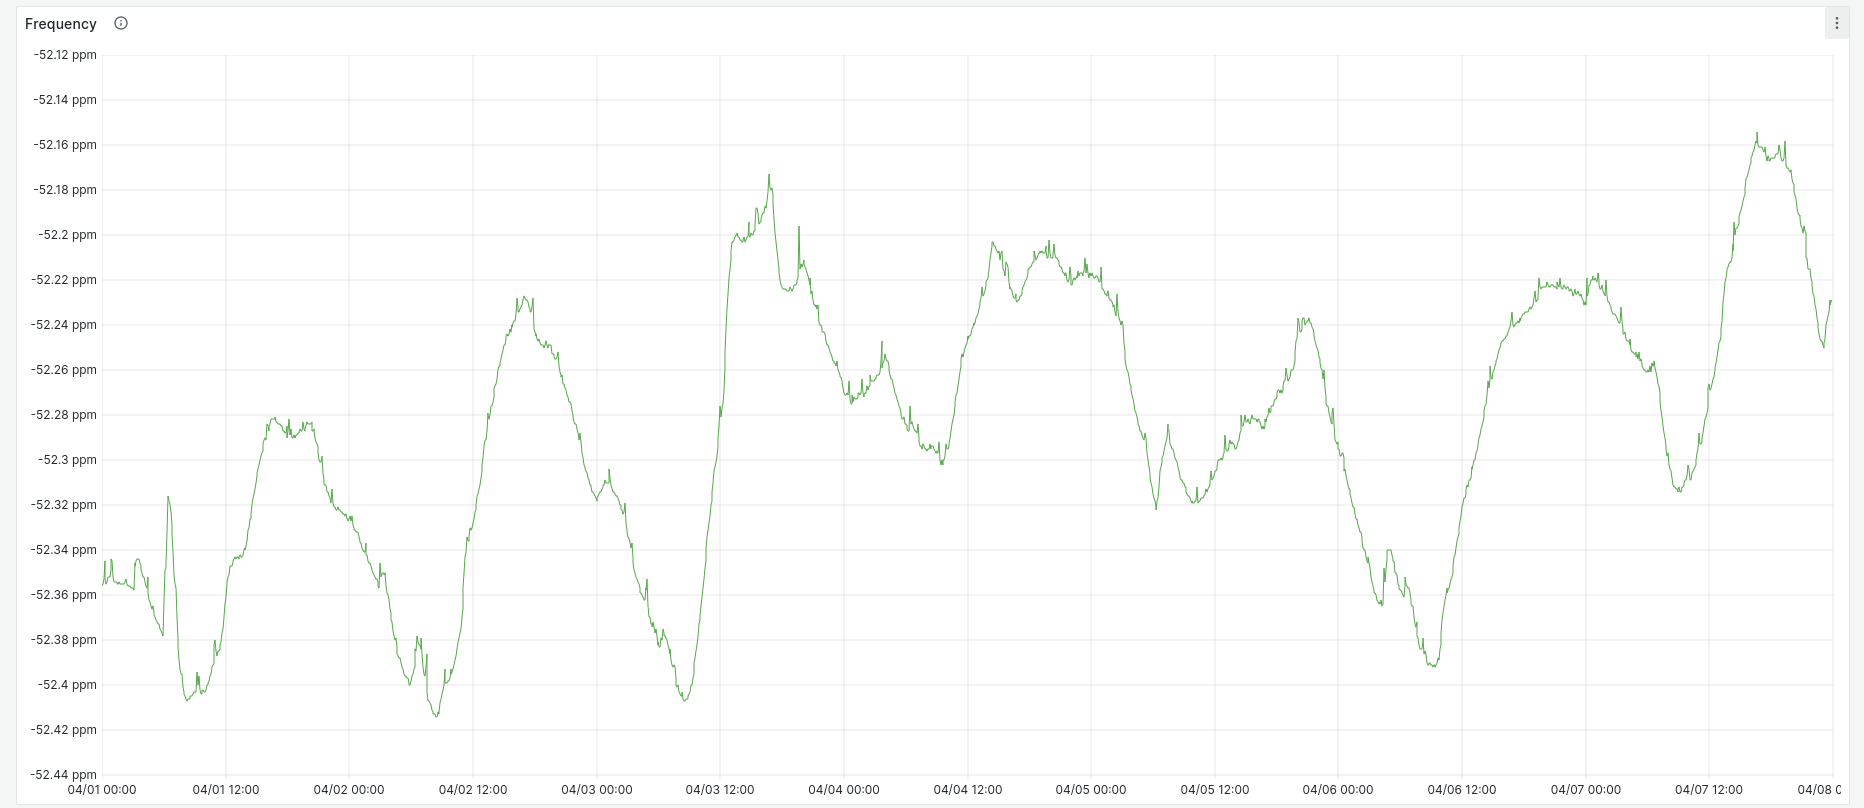 (Graph of BeagleBone system frequency error zoomed in)